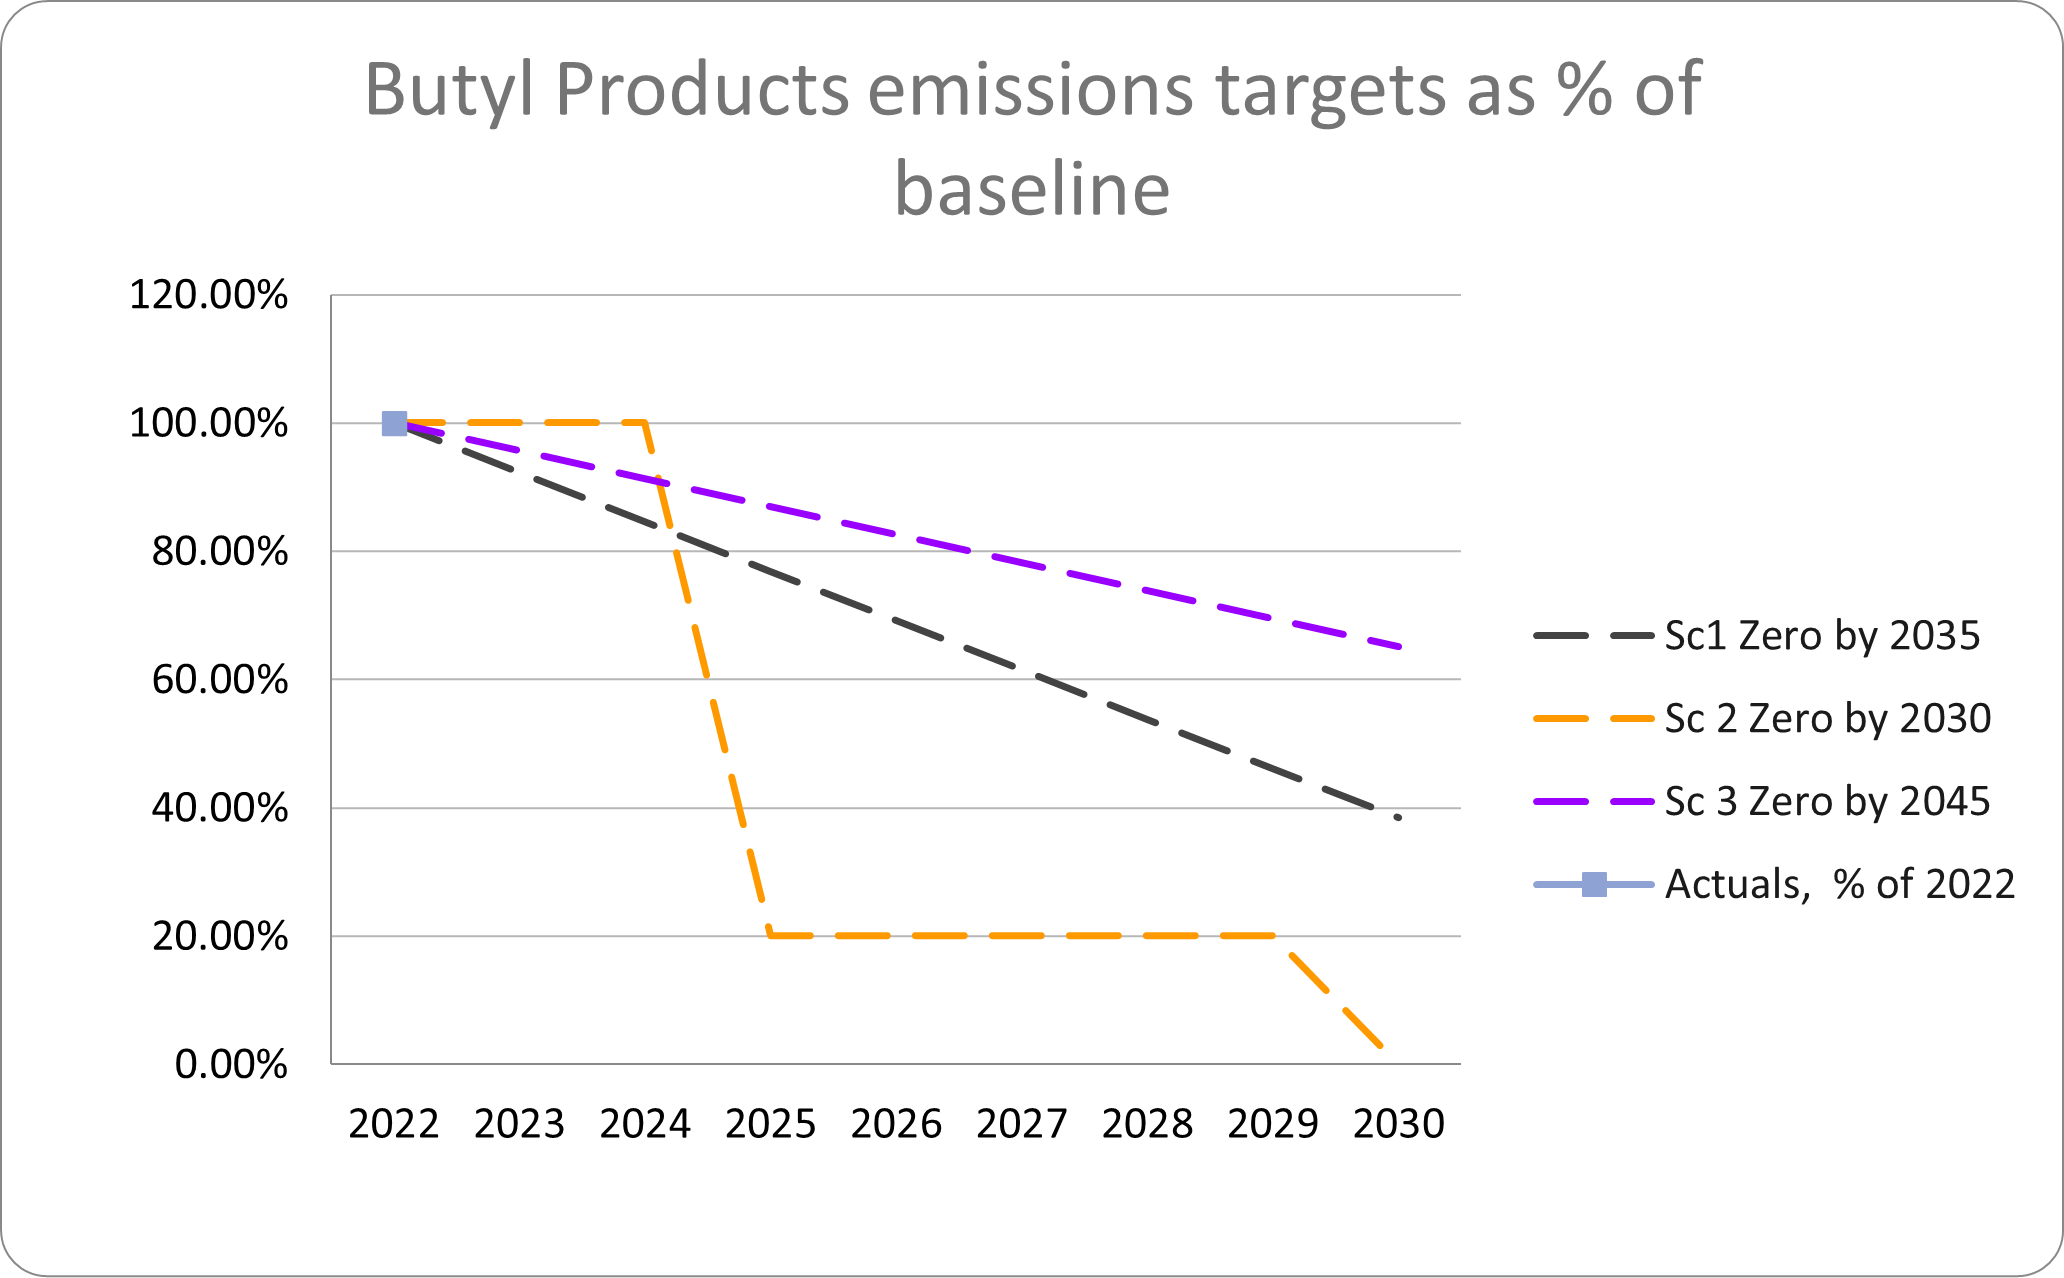 Butyl Products emissions targets as % of baseline